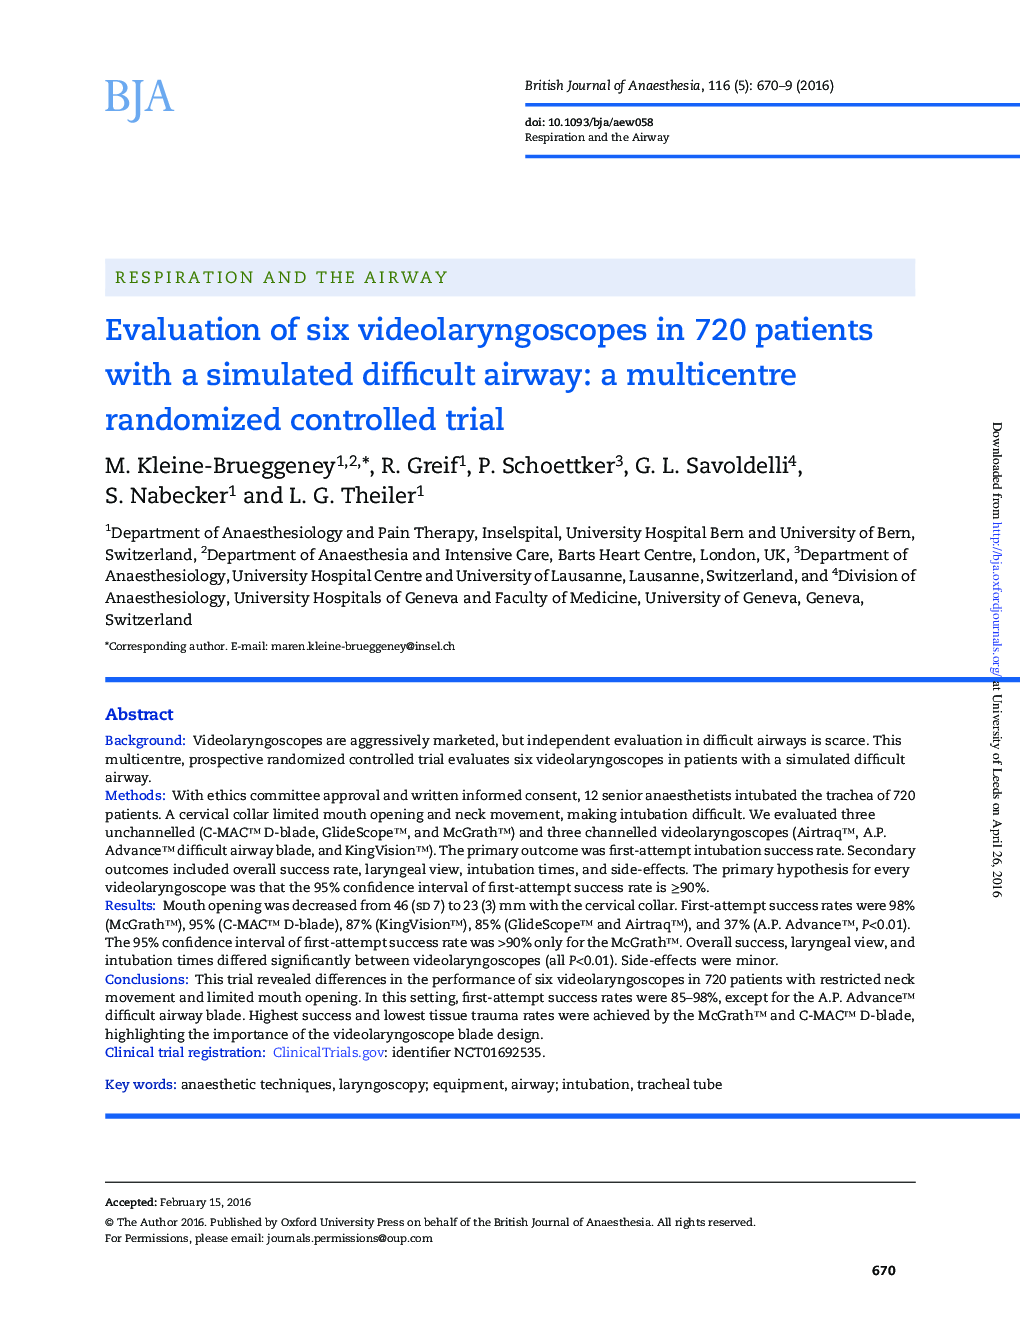 Evaluation of six videolaryngoscopes in 720 patients with a simulated difficult airway: a multicentre randomized controlled trial